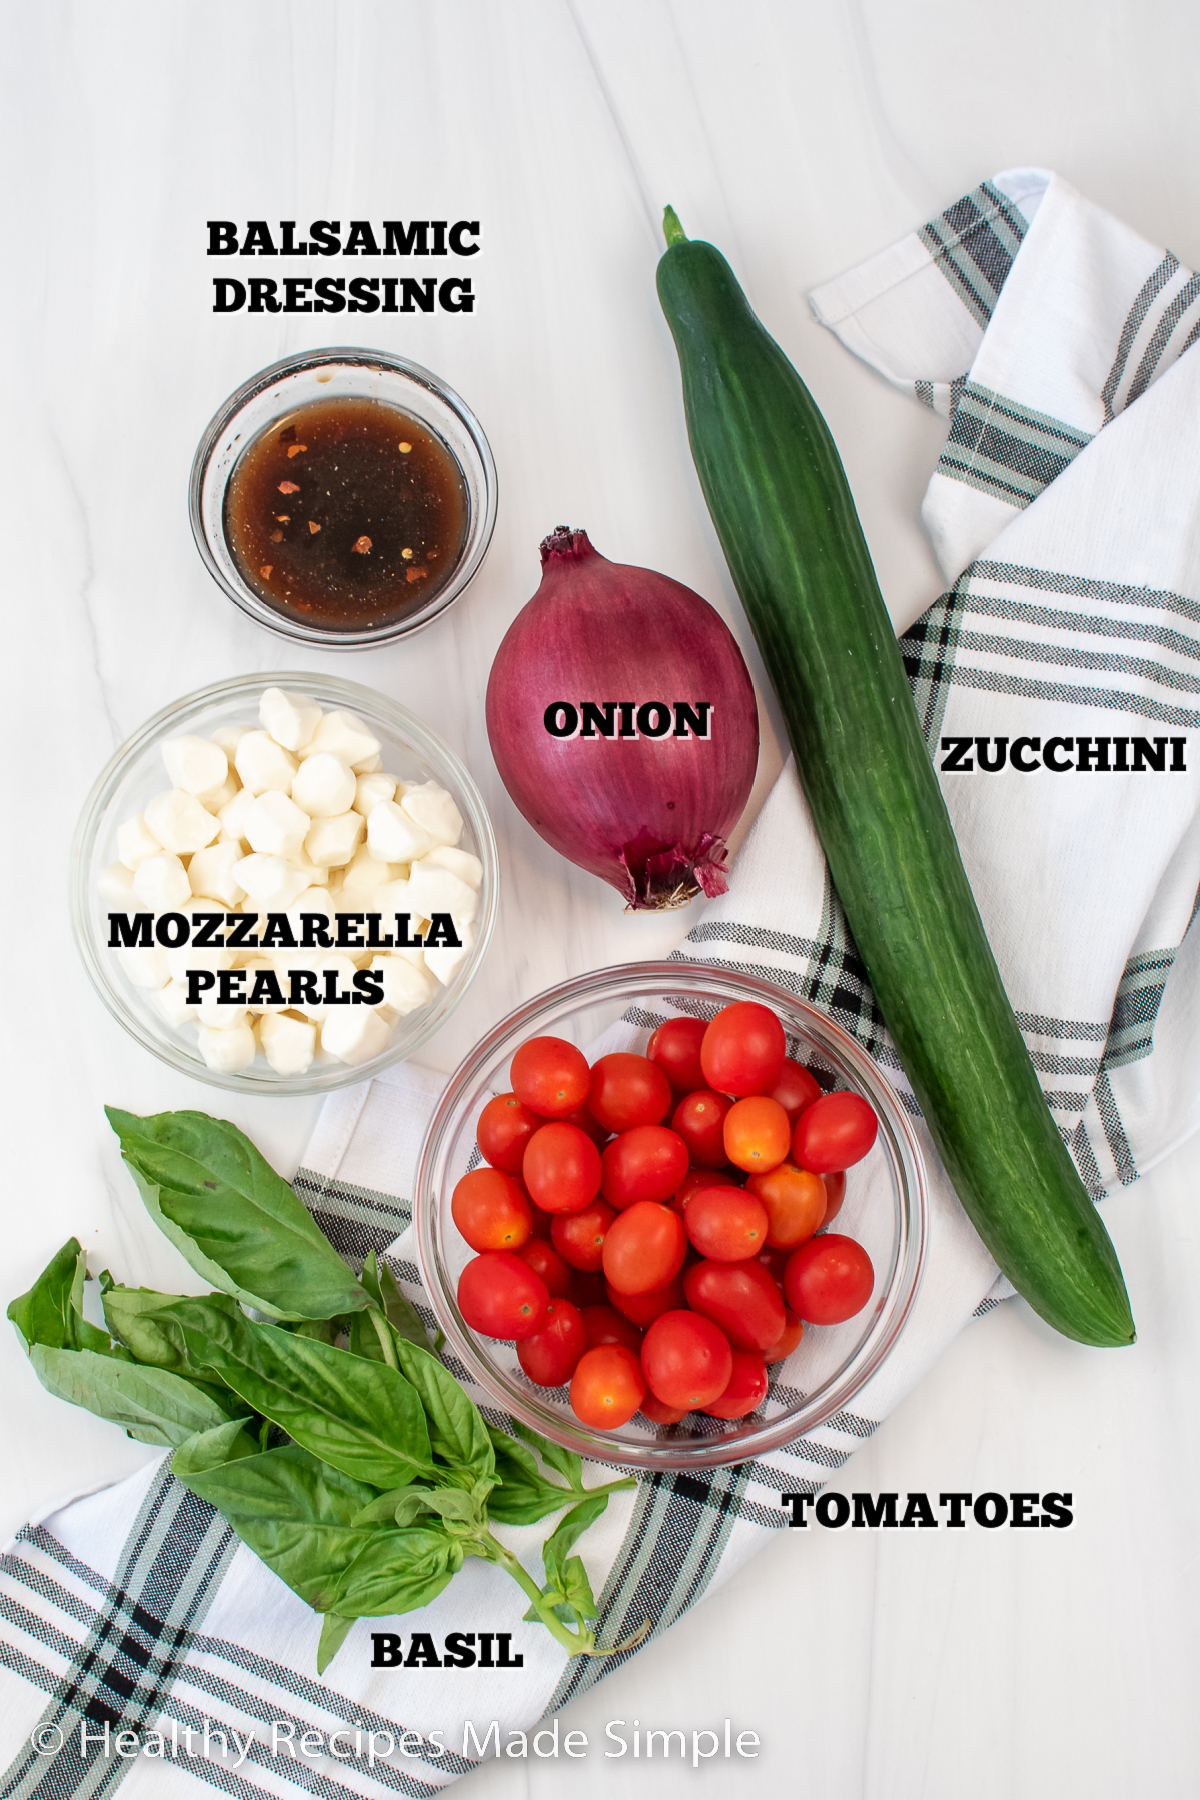 All the ingredients you need for a Tomato Cucumber Mozzarella Salad.